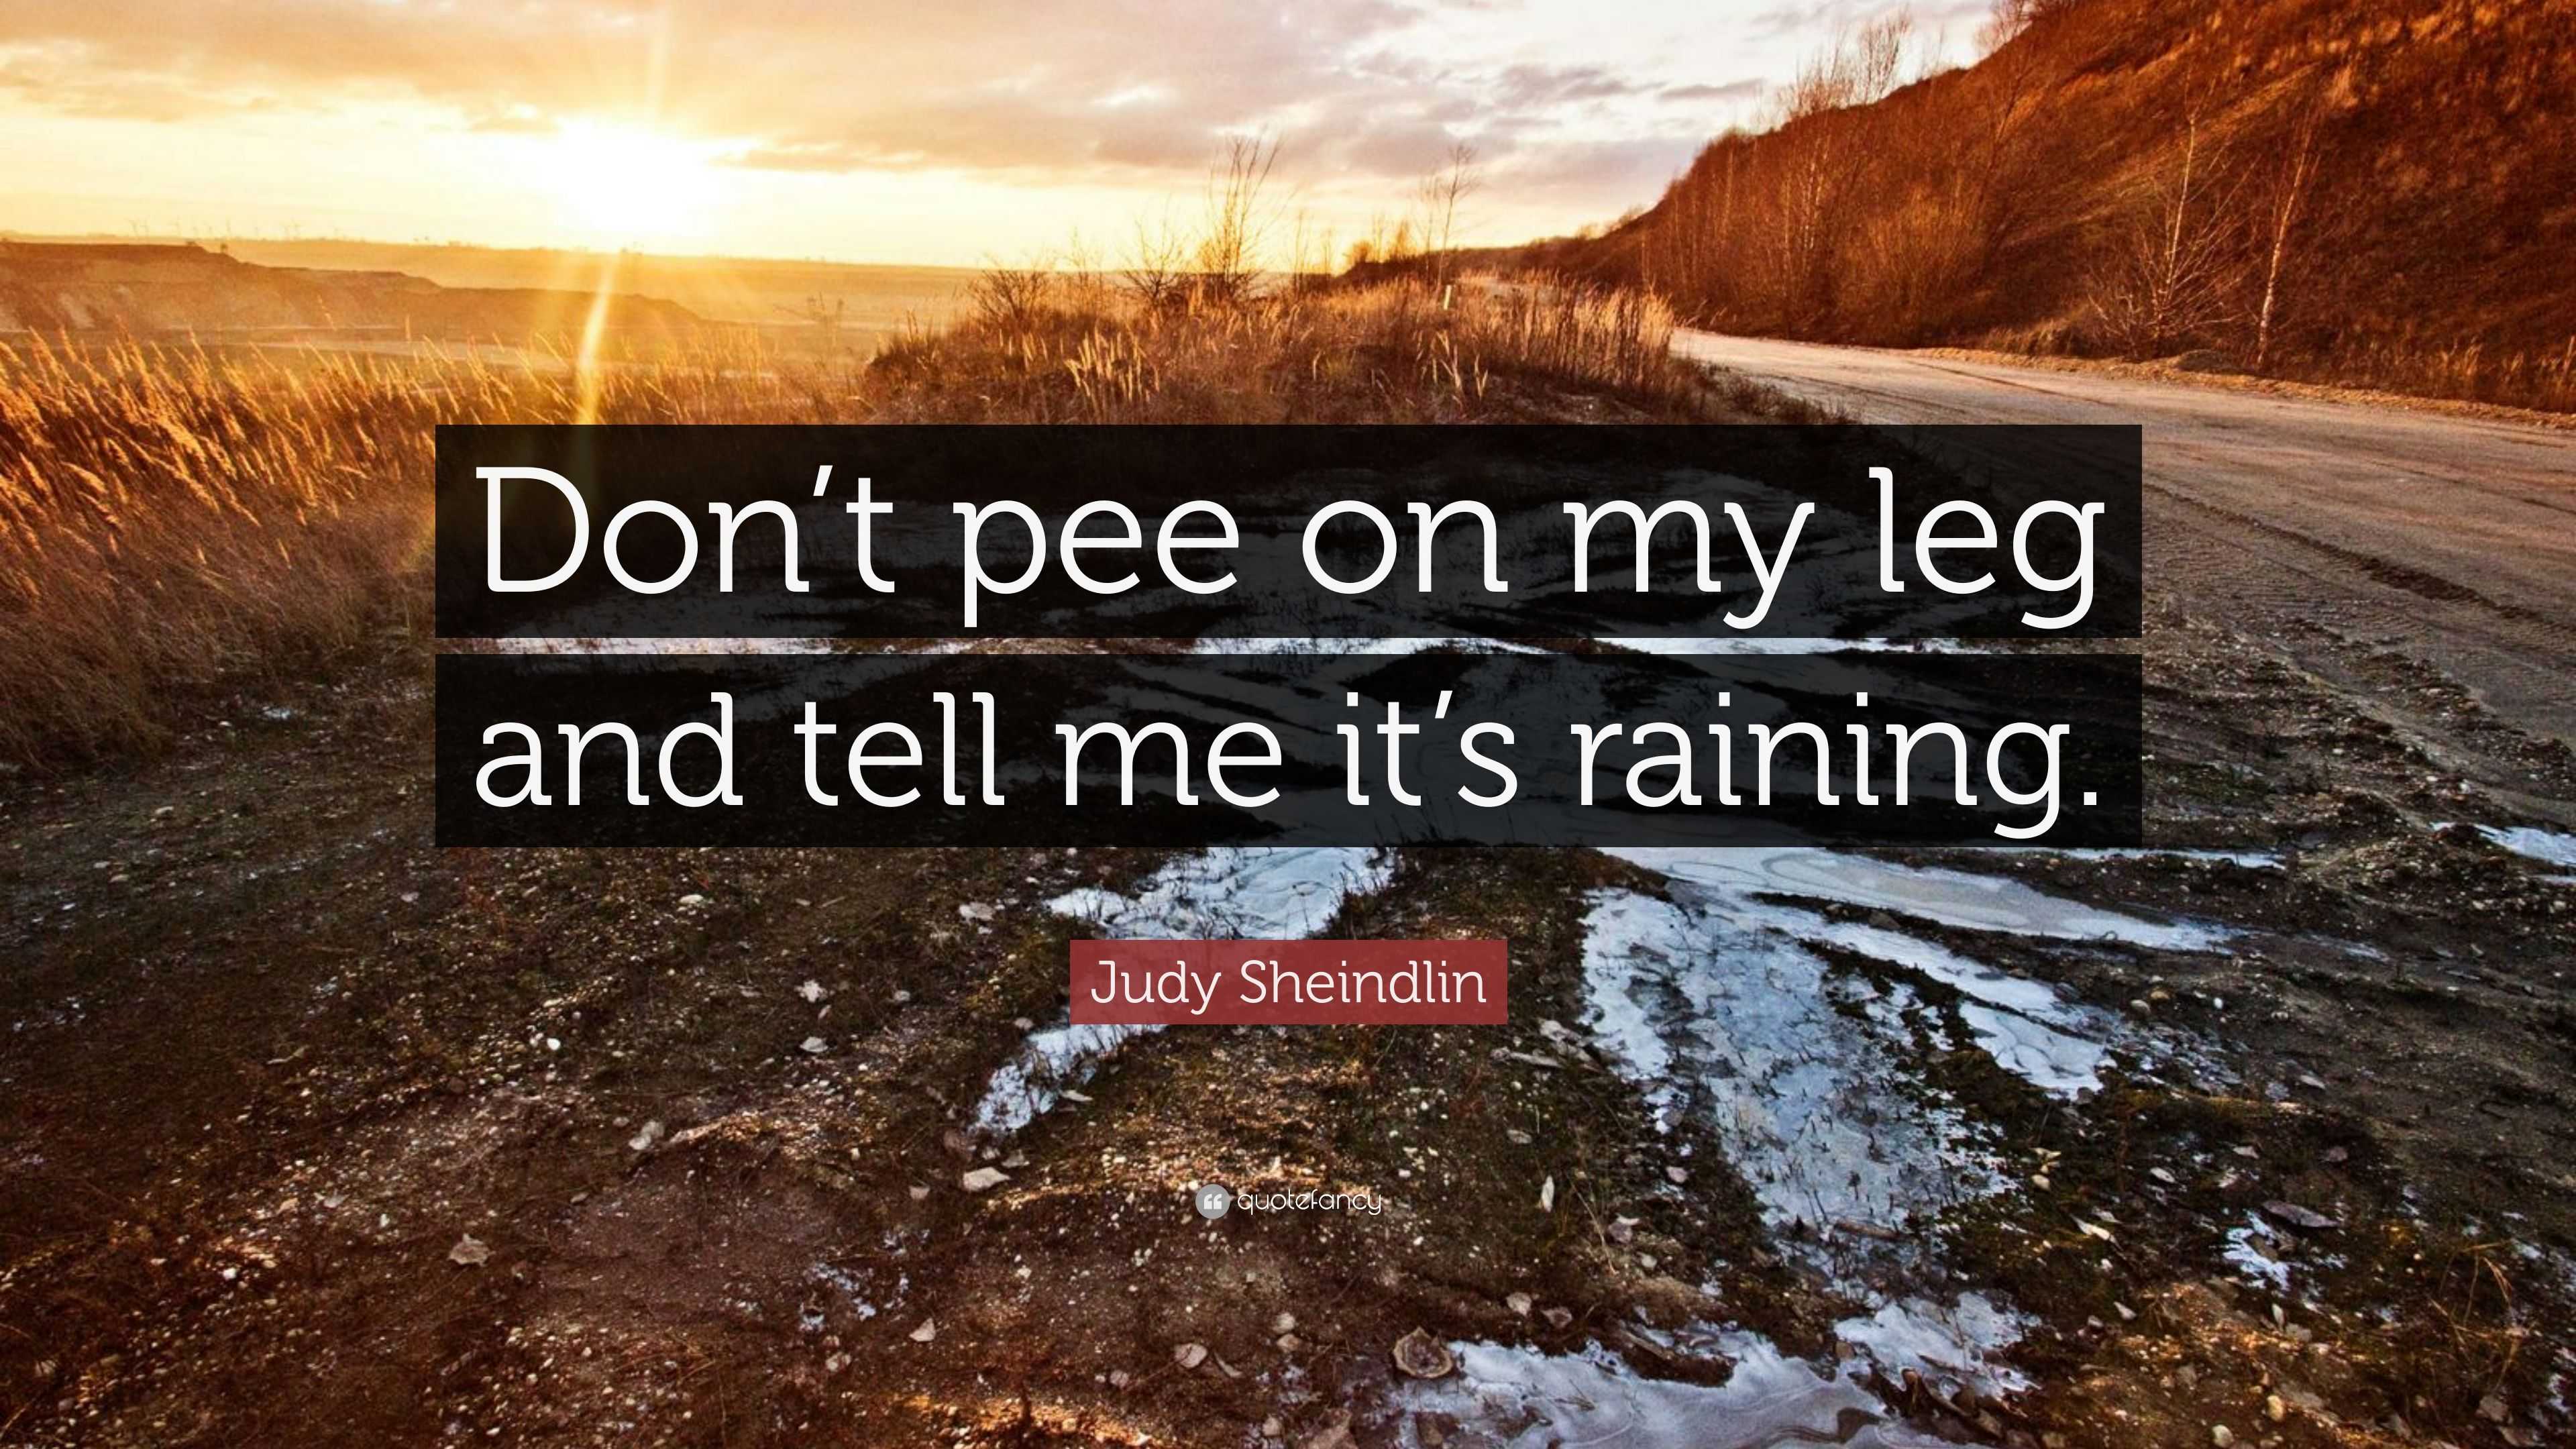 Judy Sheindlin Quote: "Don’t pee on my leg and tell me it’s raining. 